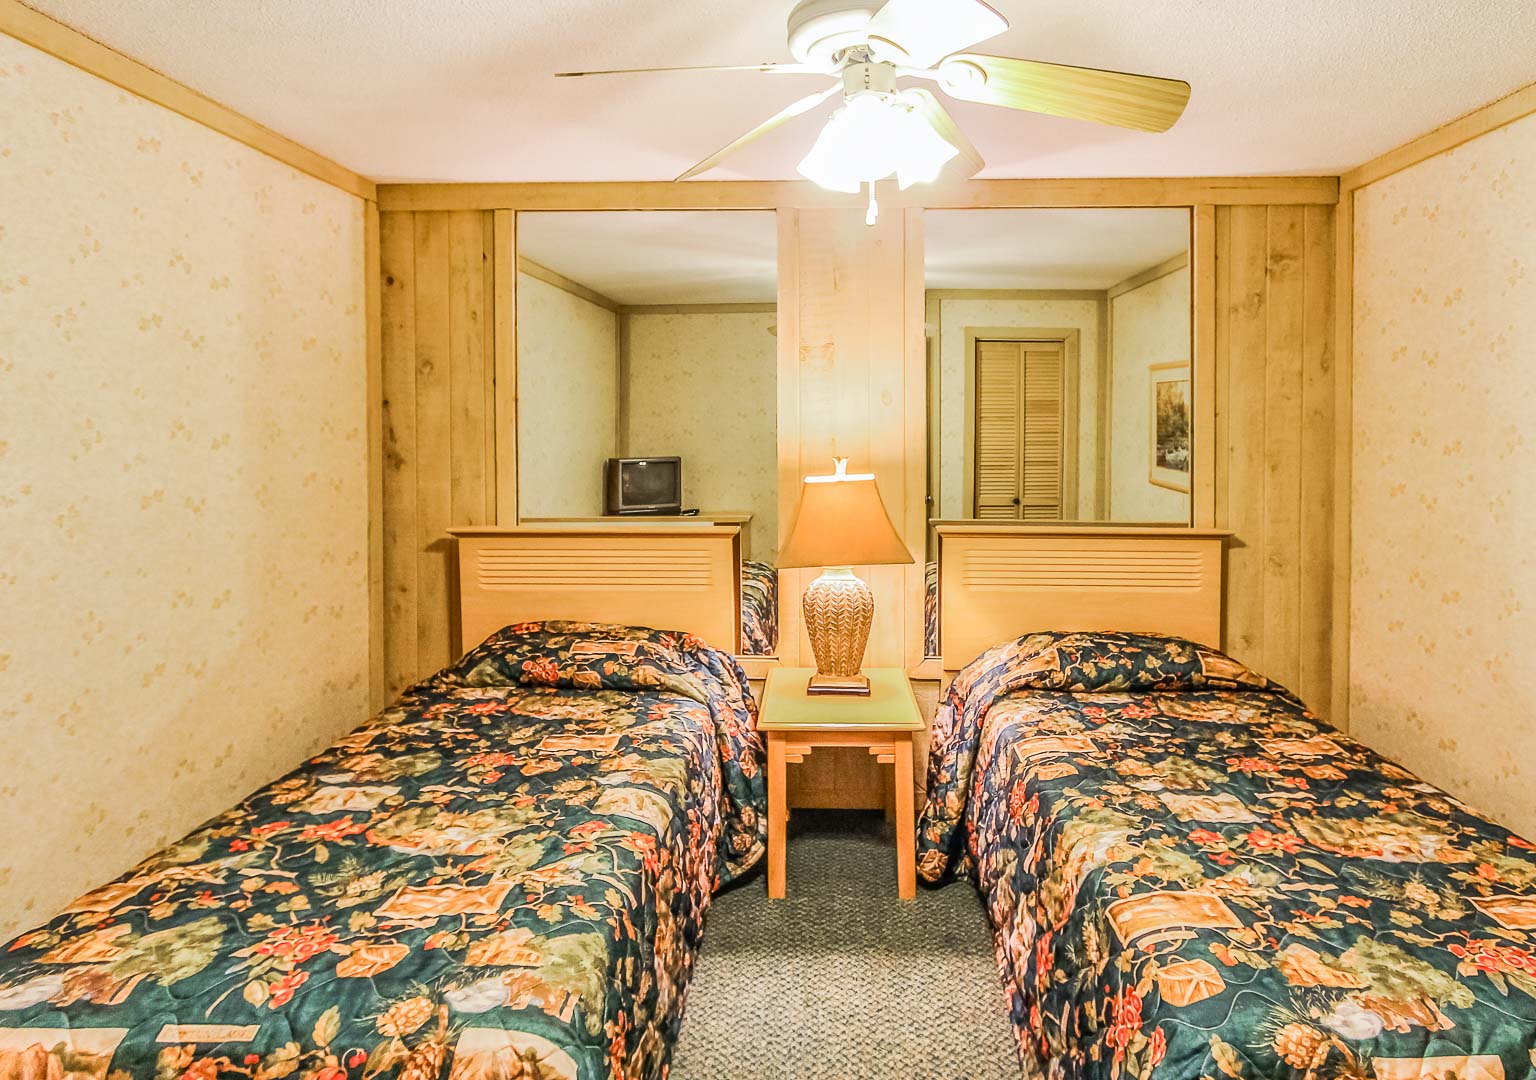 2 bedroom with double beds at VRI's Smoketree lodge in North Carolina.